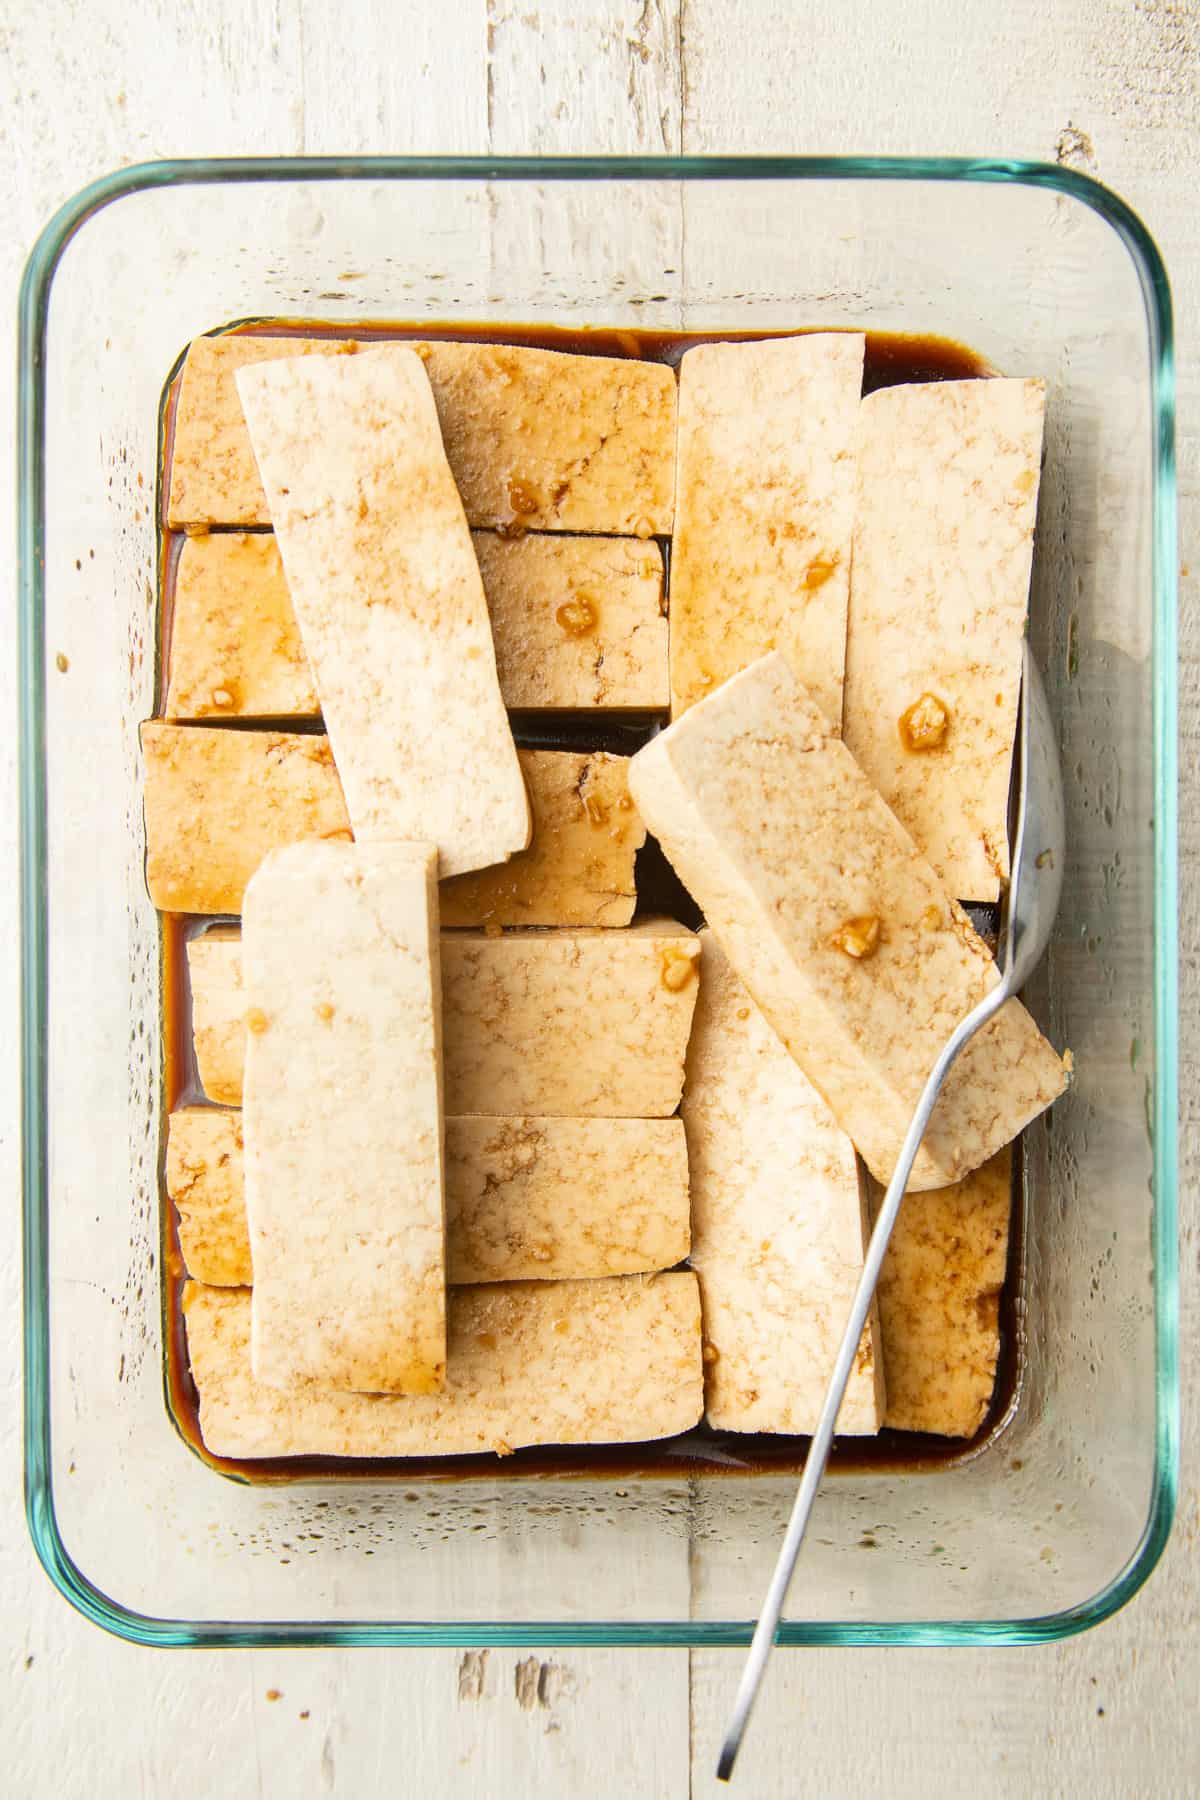 Tofu slices marinating in a dish.